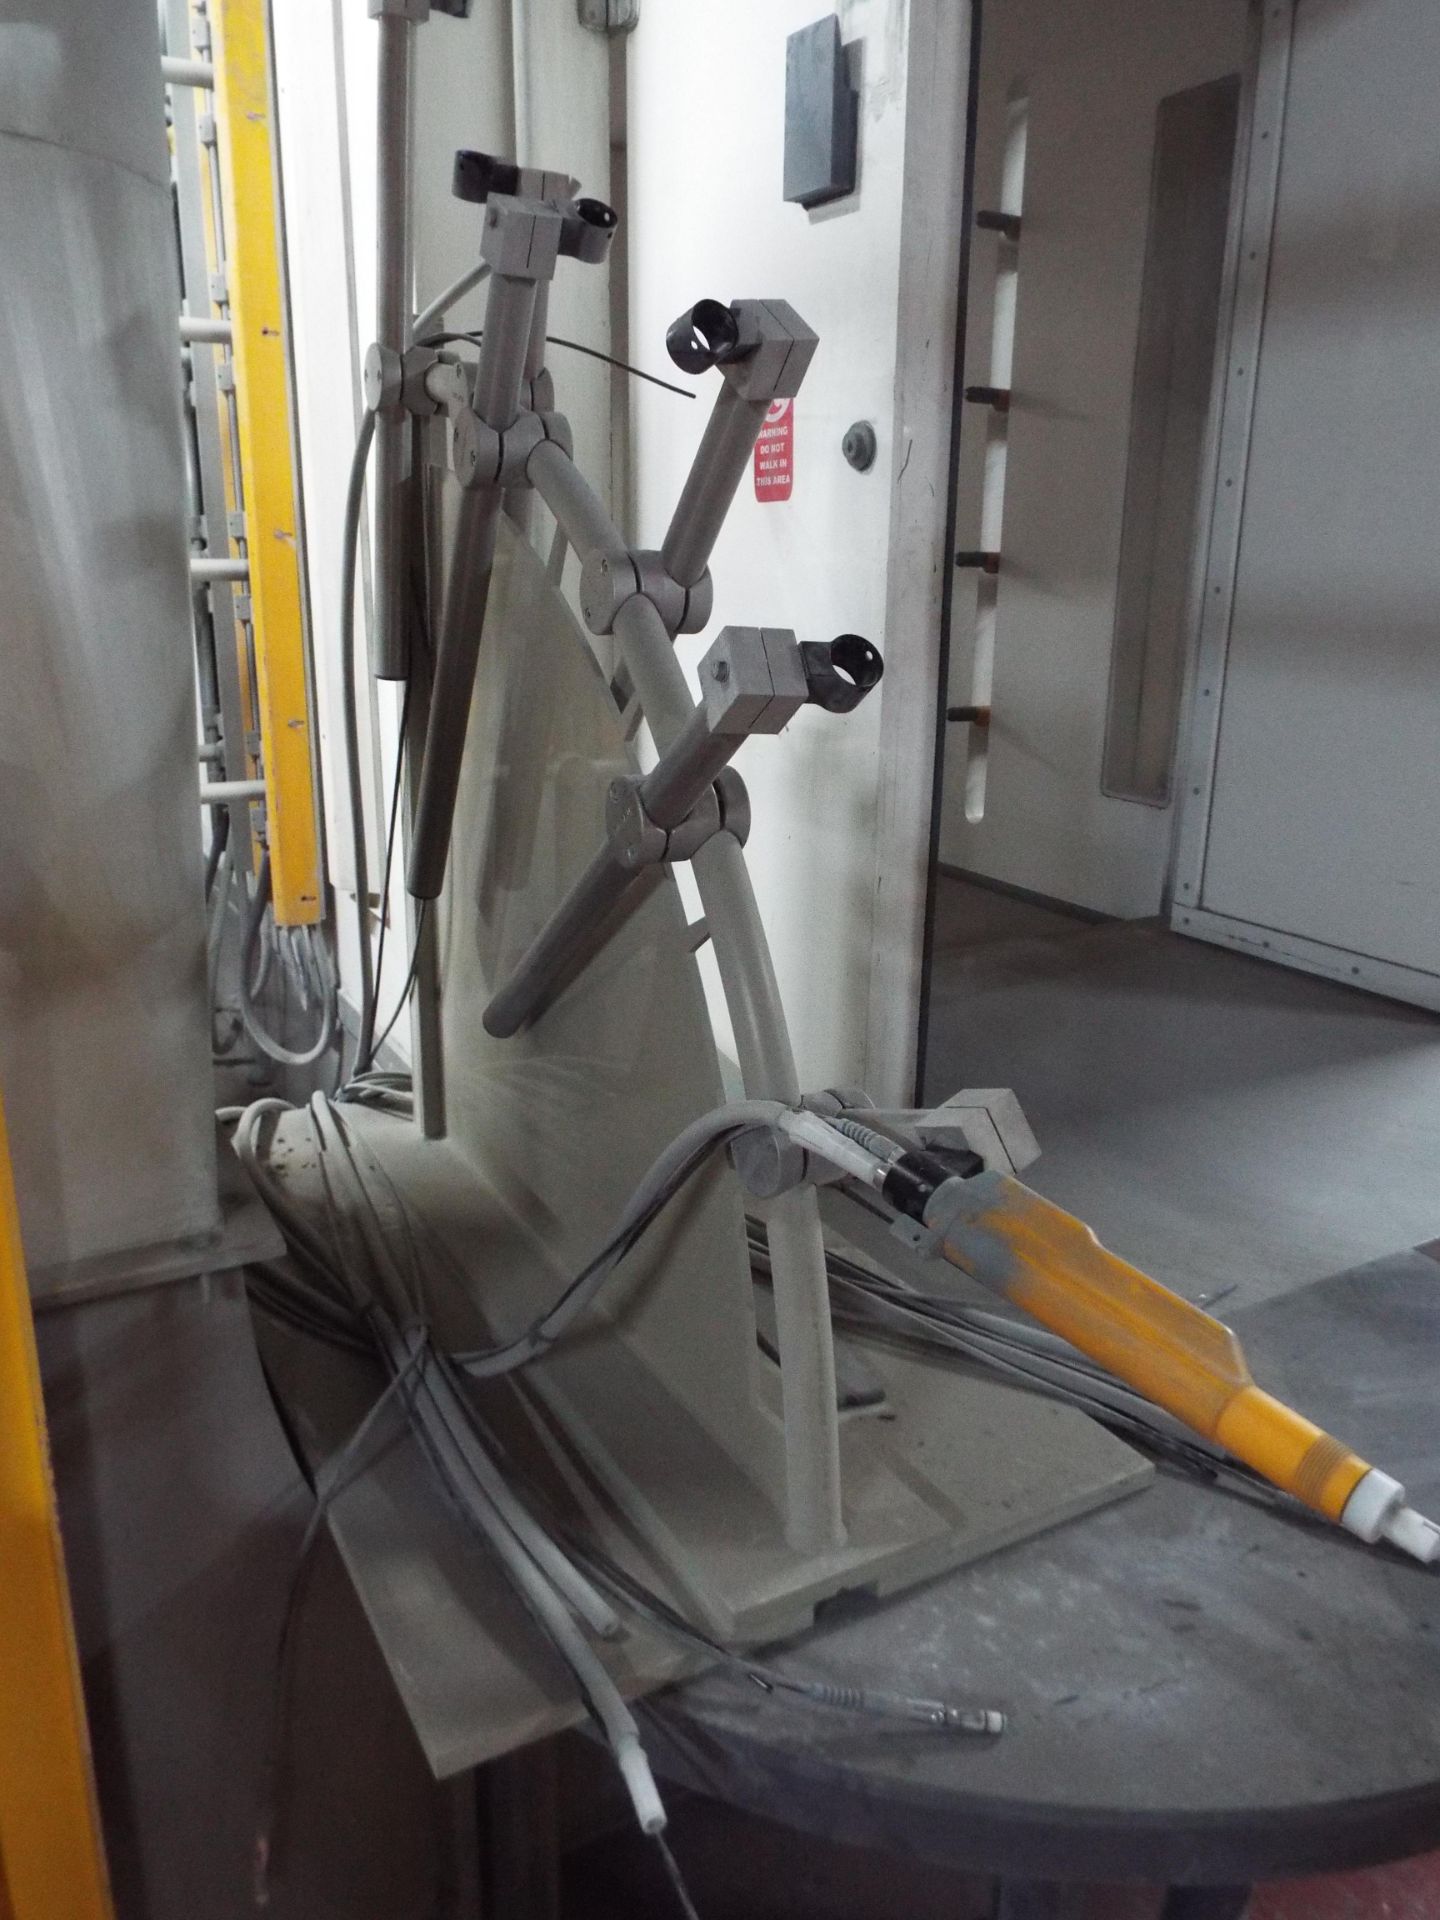 ITW Gema Powder Coating Application System cw Support Equipment - Image 26 of 47